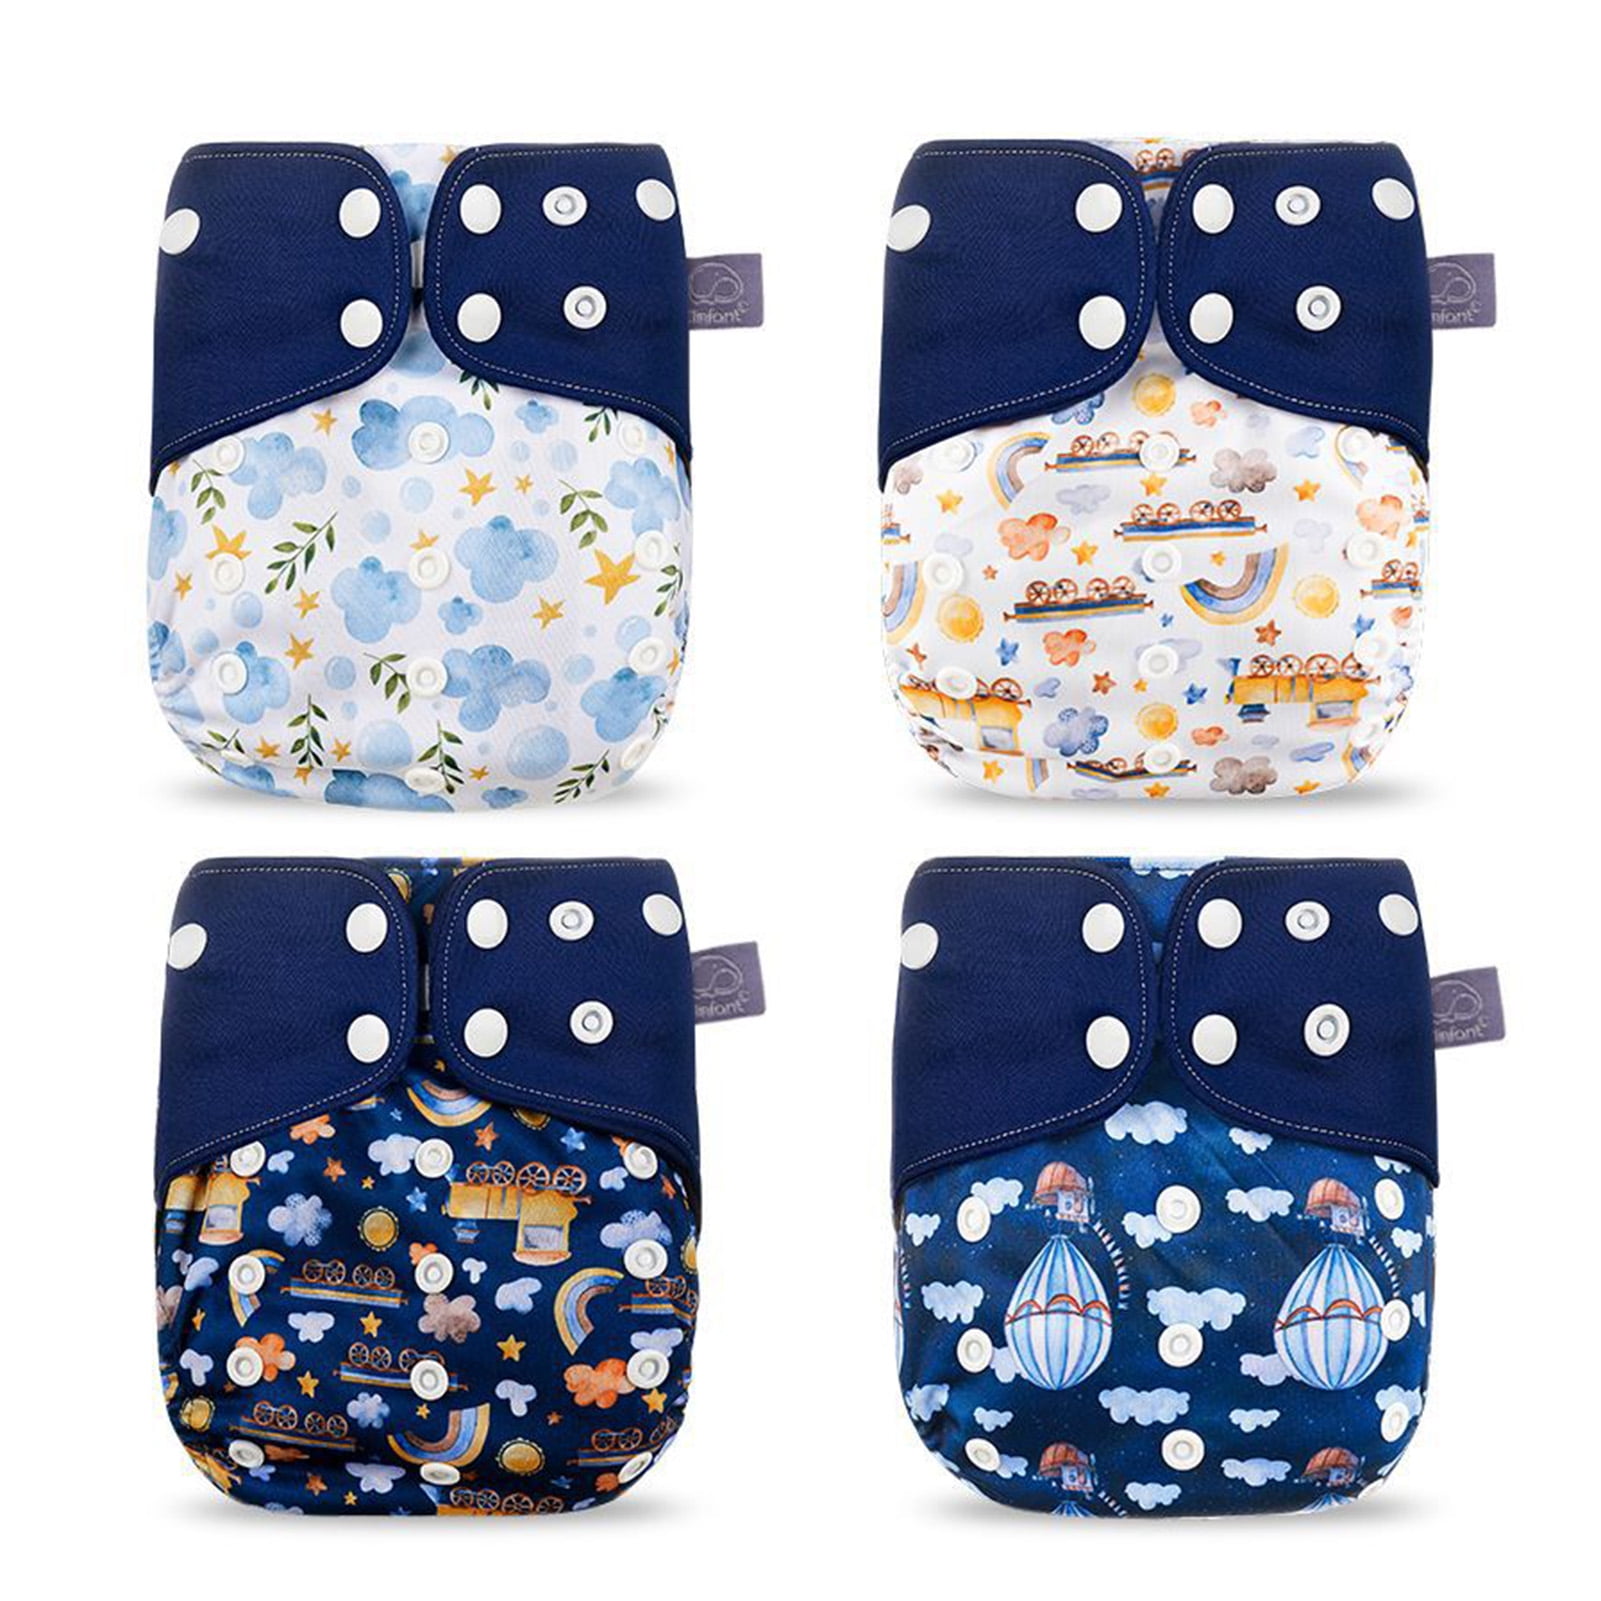 Baby Cloth Diaper Pocket One Size Adjustable Reusable Washable Nappy for Baby Girls Boys 